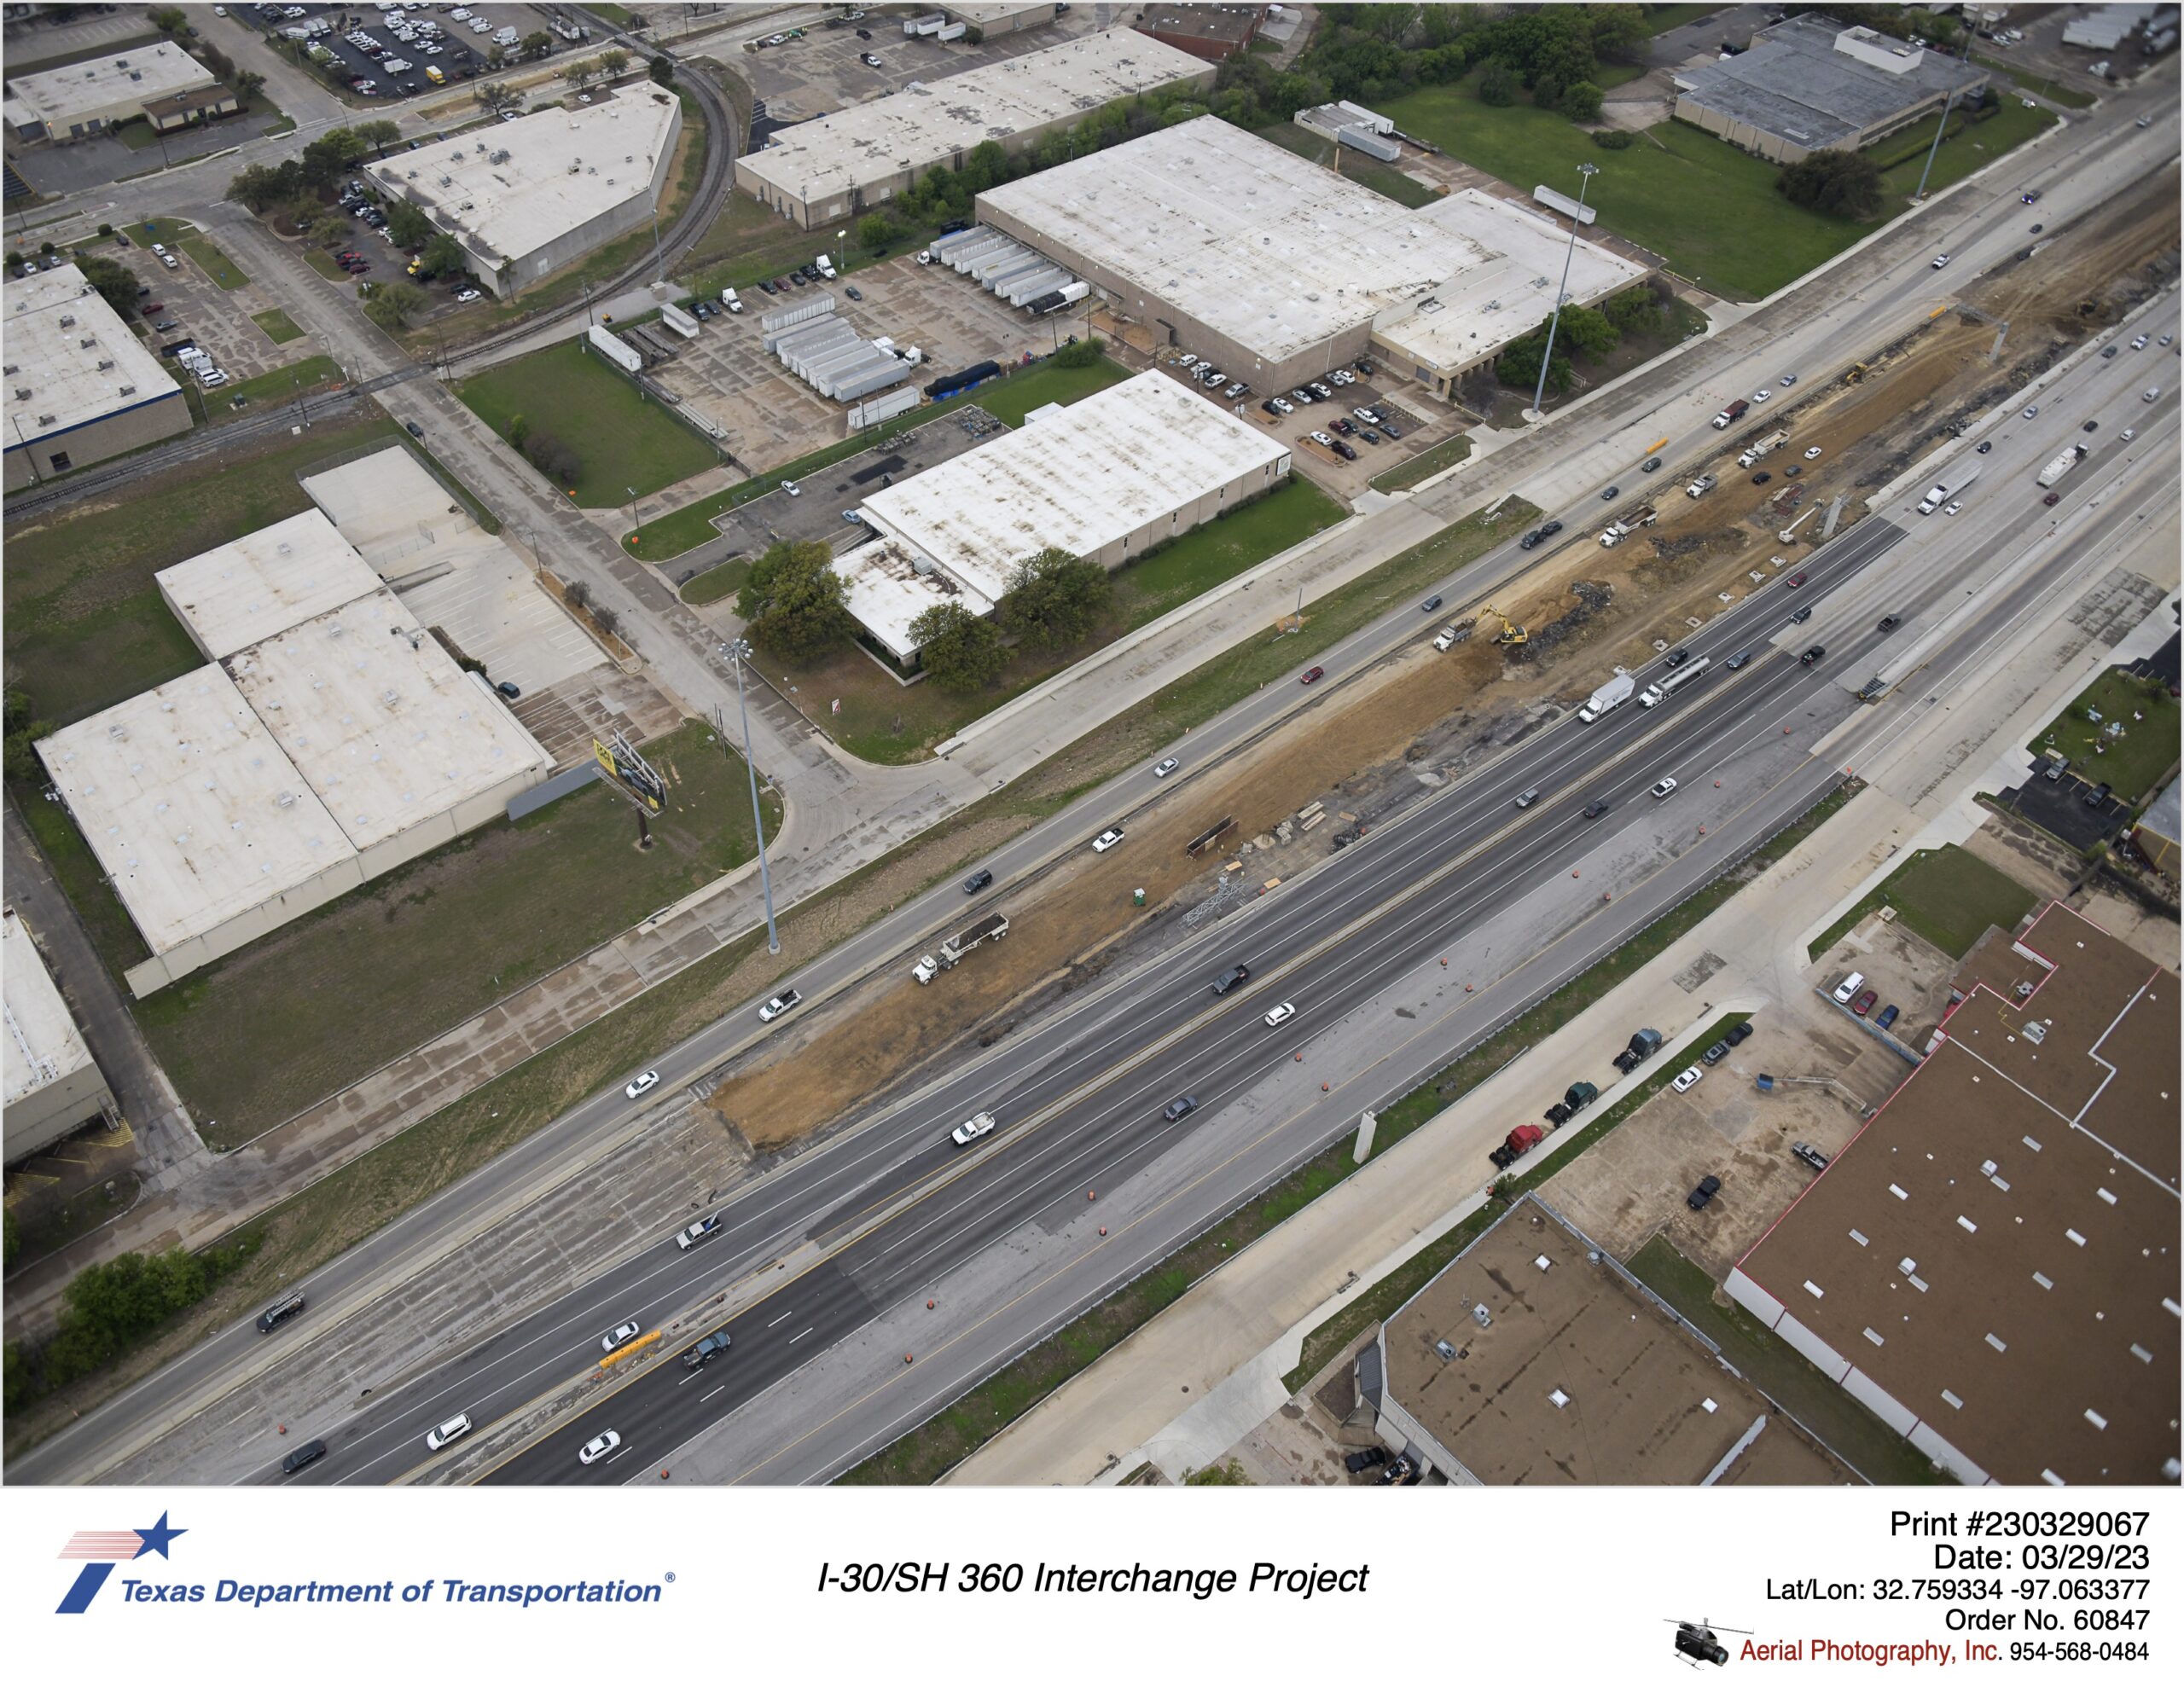 I-30 eastbound mainlane construction at east end of project. March 2023.